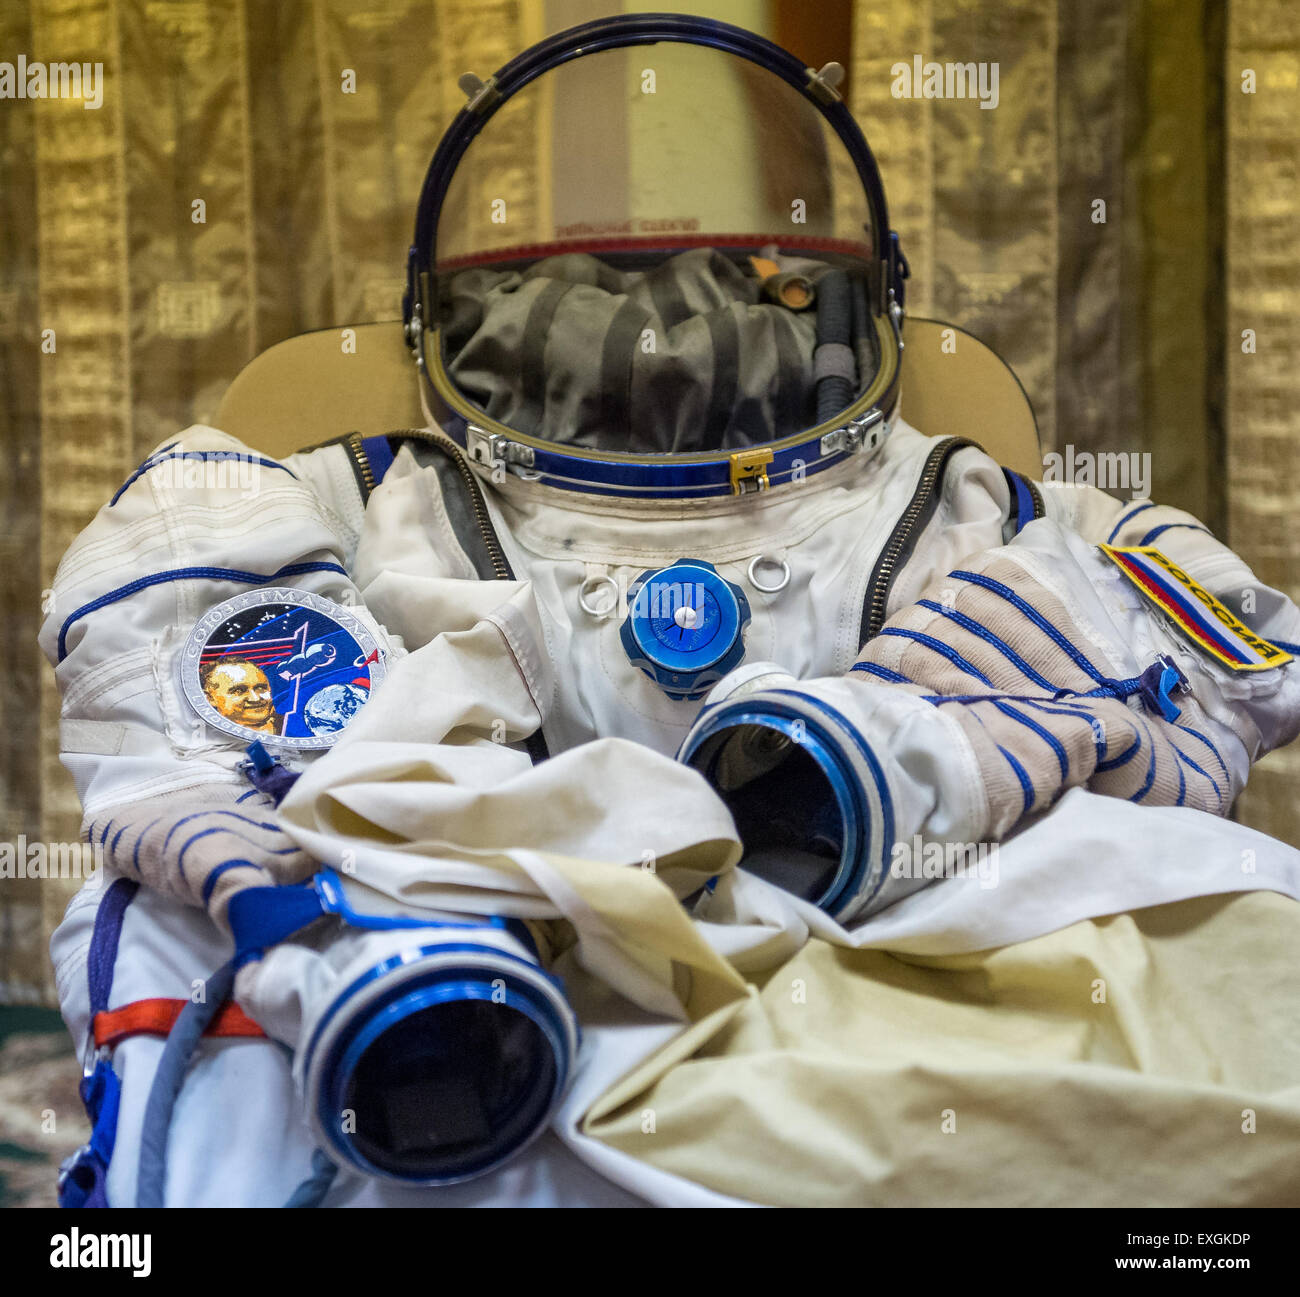 A Russian sokol suits is ready to be donned ahead of the second day of qualification exams with Russian cosmonaut Oleg Kononenko, NASA astronaut Kjell Lindgren, and Japan Aerospace Exploration Agency (JAXA) astronaut Kimya Yui, Thursday, May 7, 2015 at the Gagarin Cosmonaut Training Center (GCTC) in Star City, Russia. The Expedition 44/45 trio is preparing for launch to the International Space Station in their Soyuz TMA-17M spacecraft from the Baikonur Cosmodrome in Kazakhstan. Stock Photo